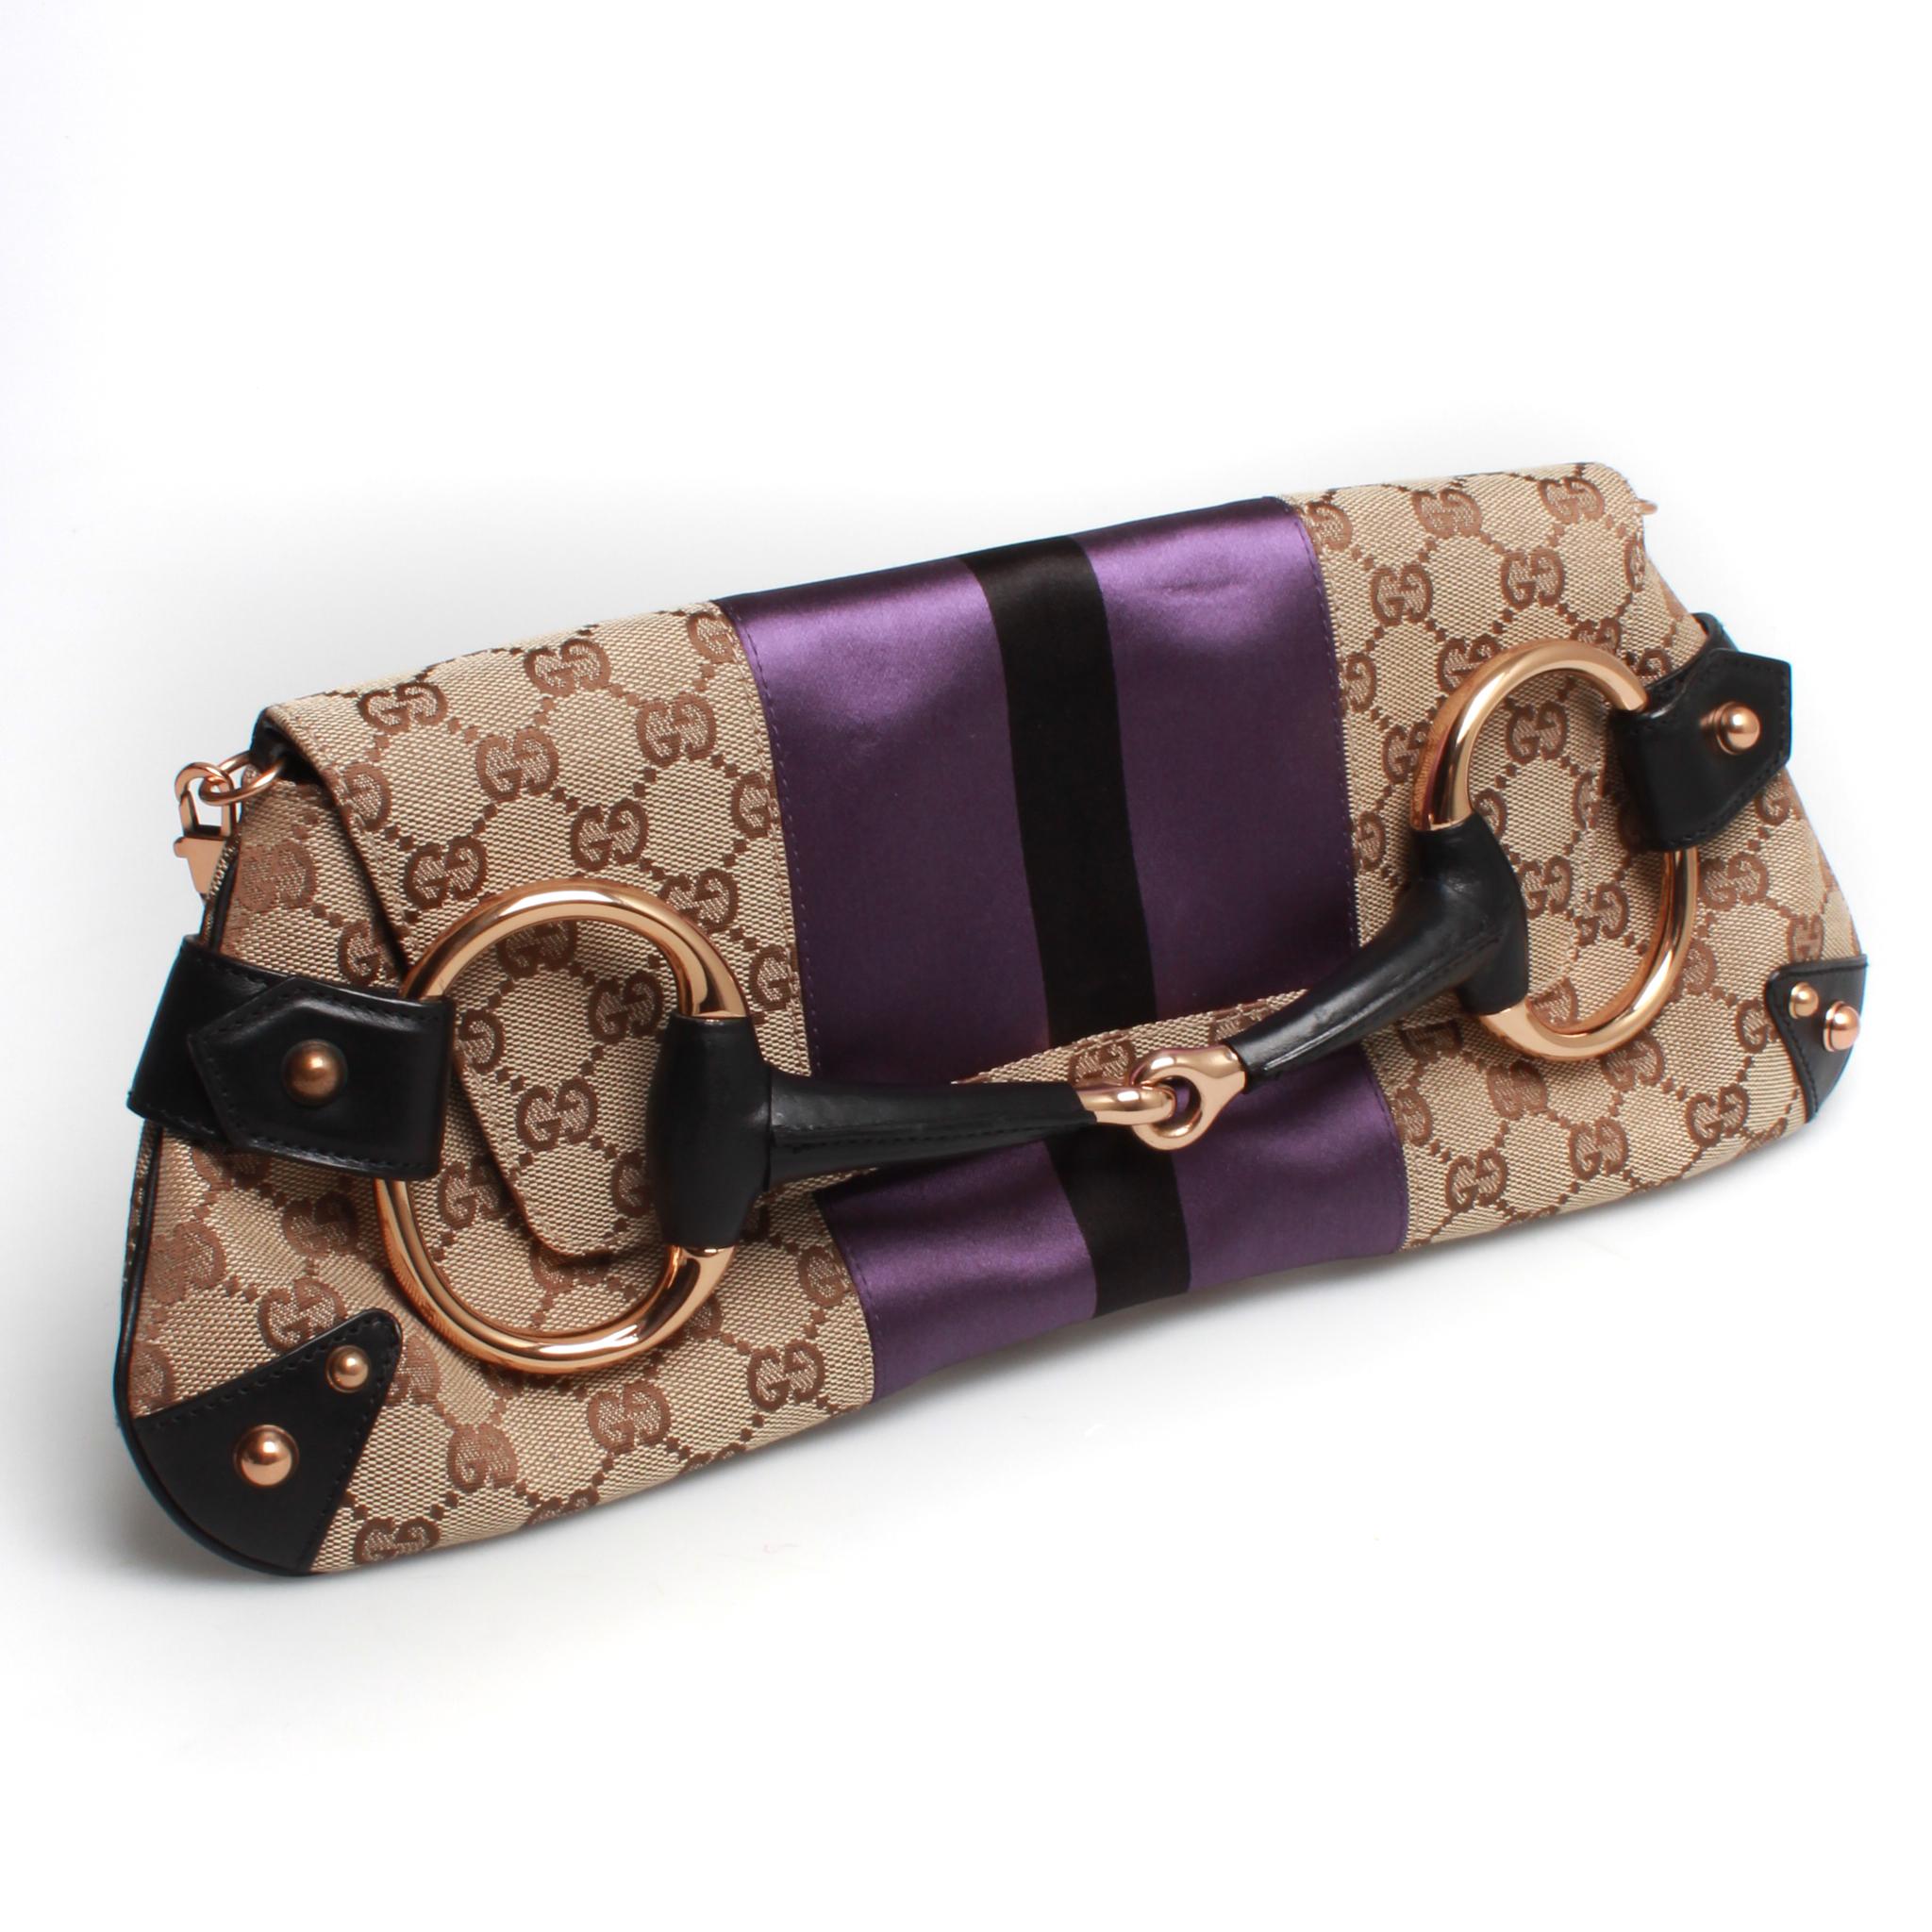 Gucci GG monogram canvas horsebit clutch. This incredible Tom Ford for Gucci era clutch bag features a silky satin purple and black central stripe, gold toned bronze shoulder or wrist strap with bamboo detailing, and large horse bit embellishment.
